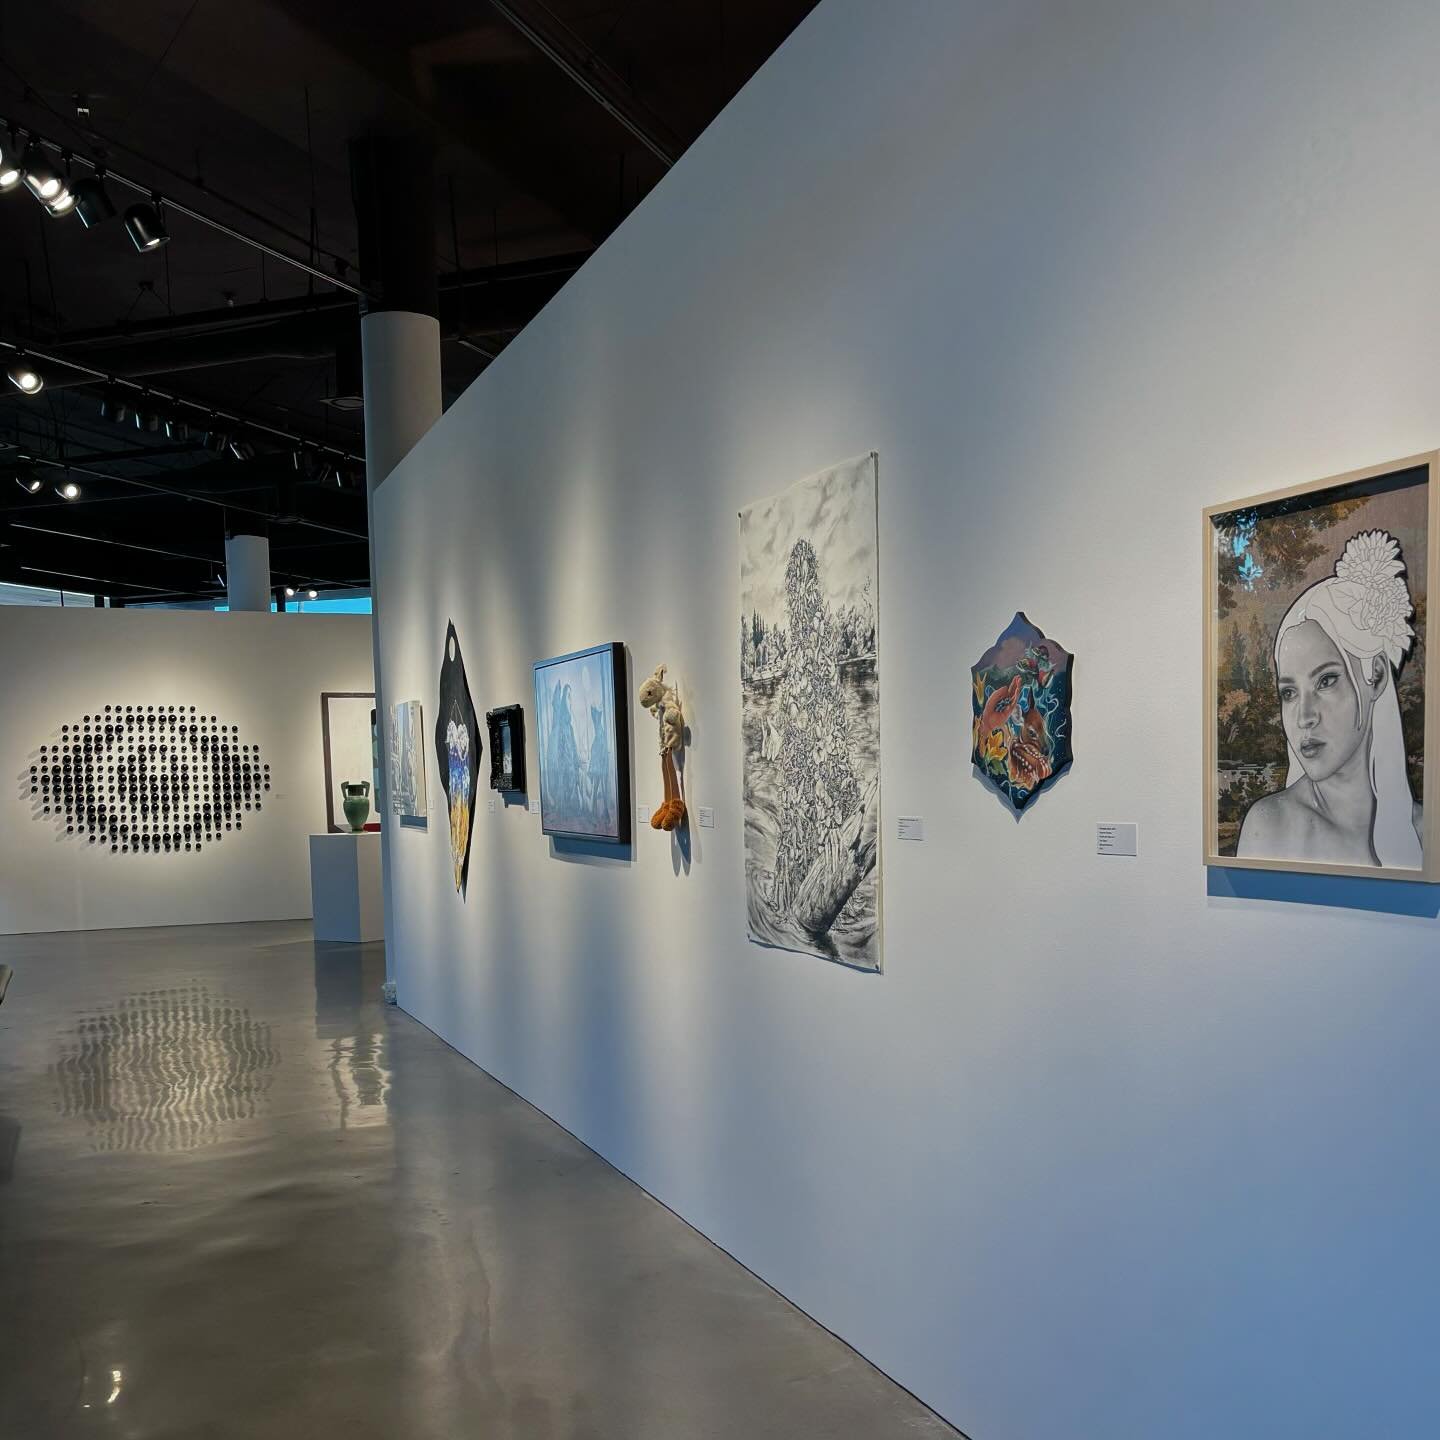 👁️👄👁️ Come take a look at some crazy views! Made in California is now open!

🌊 Made in California features over 100+ California artists working in a variety of mediums from across the state. With a range of subject matters, style, and scale, ther